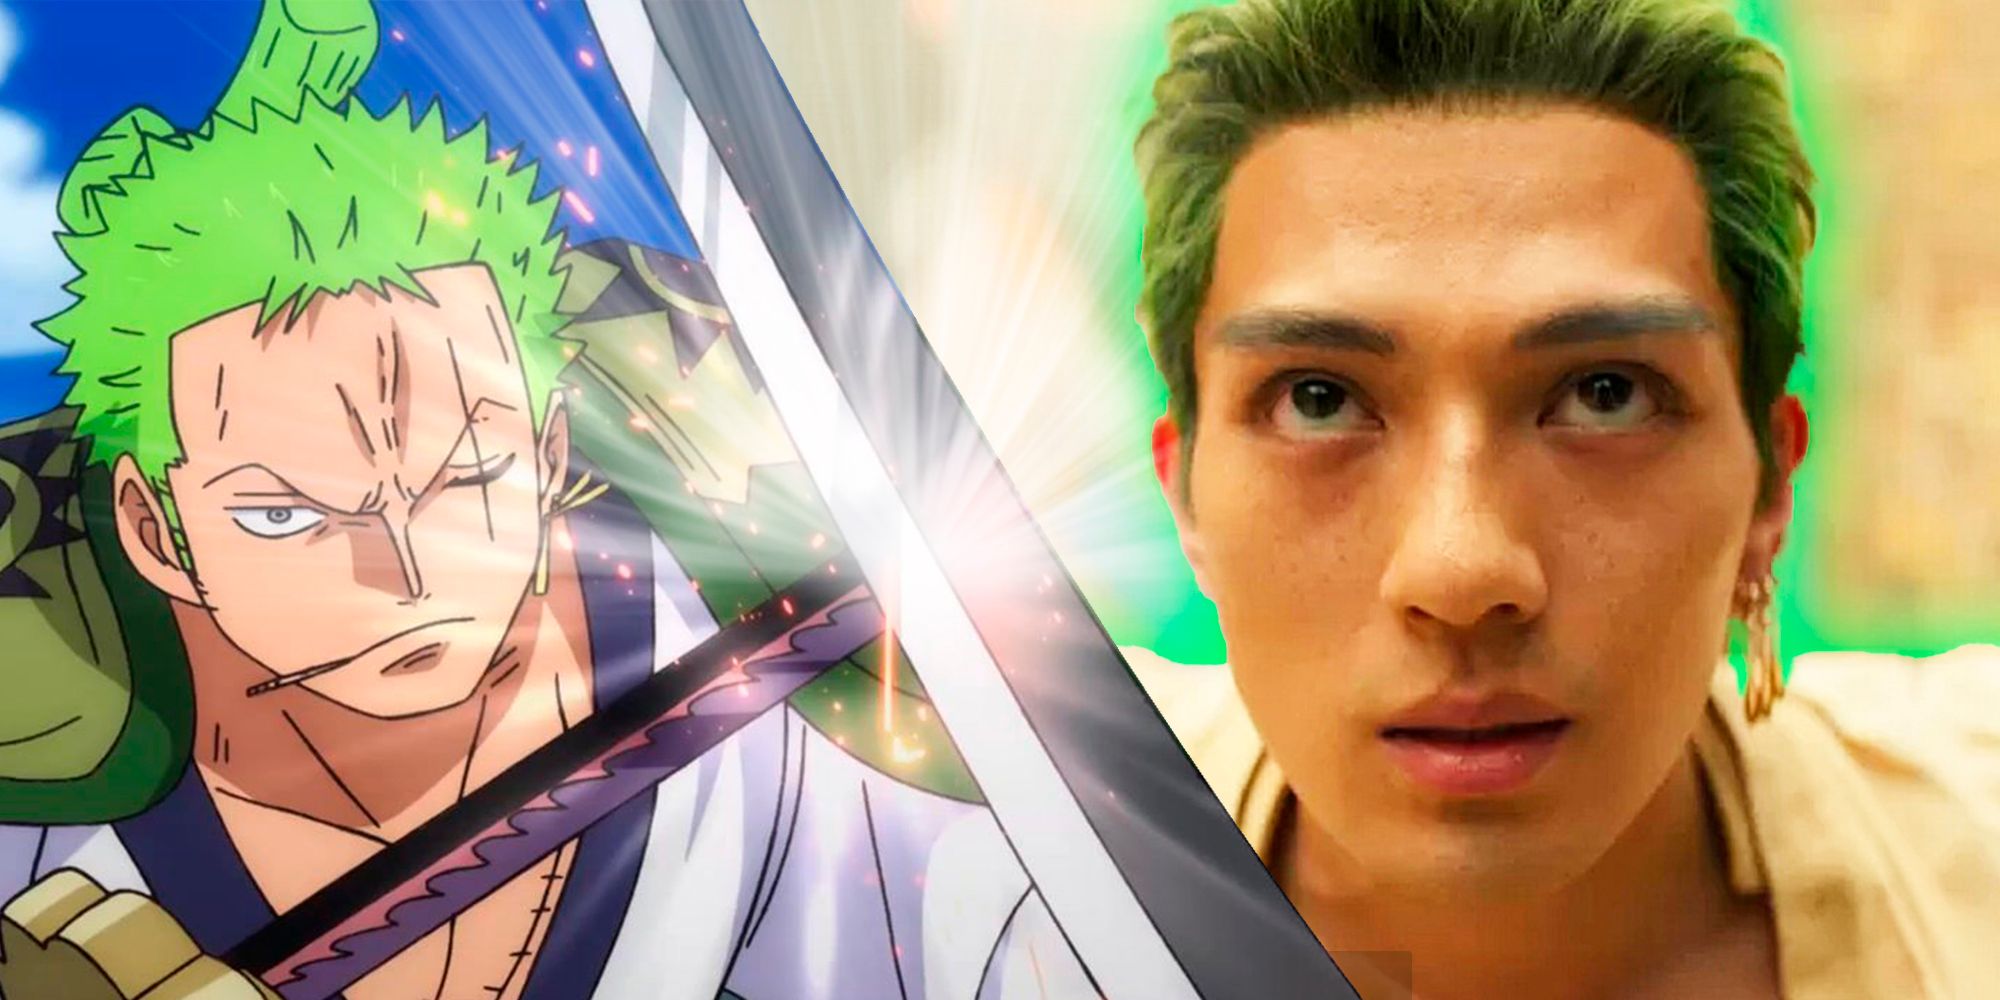 One Piece’s perfect Roronoa Zoro casting makes this live-action anime film even worse with 21% on Rotten Tomatoes